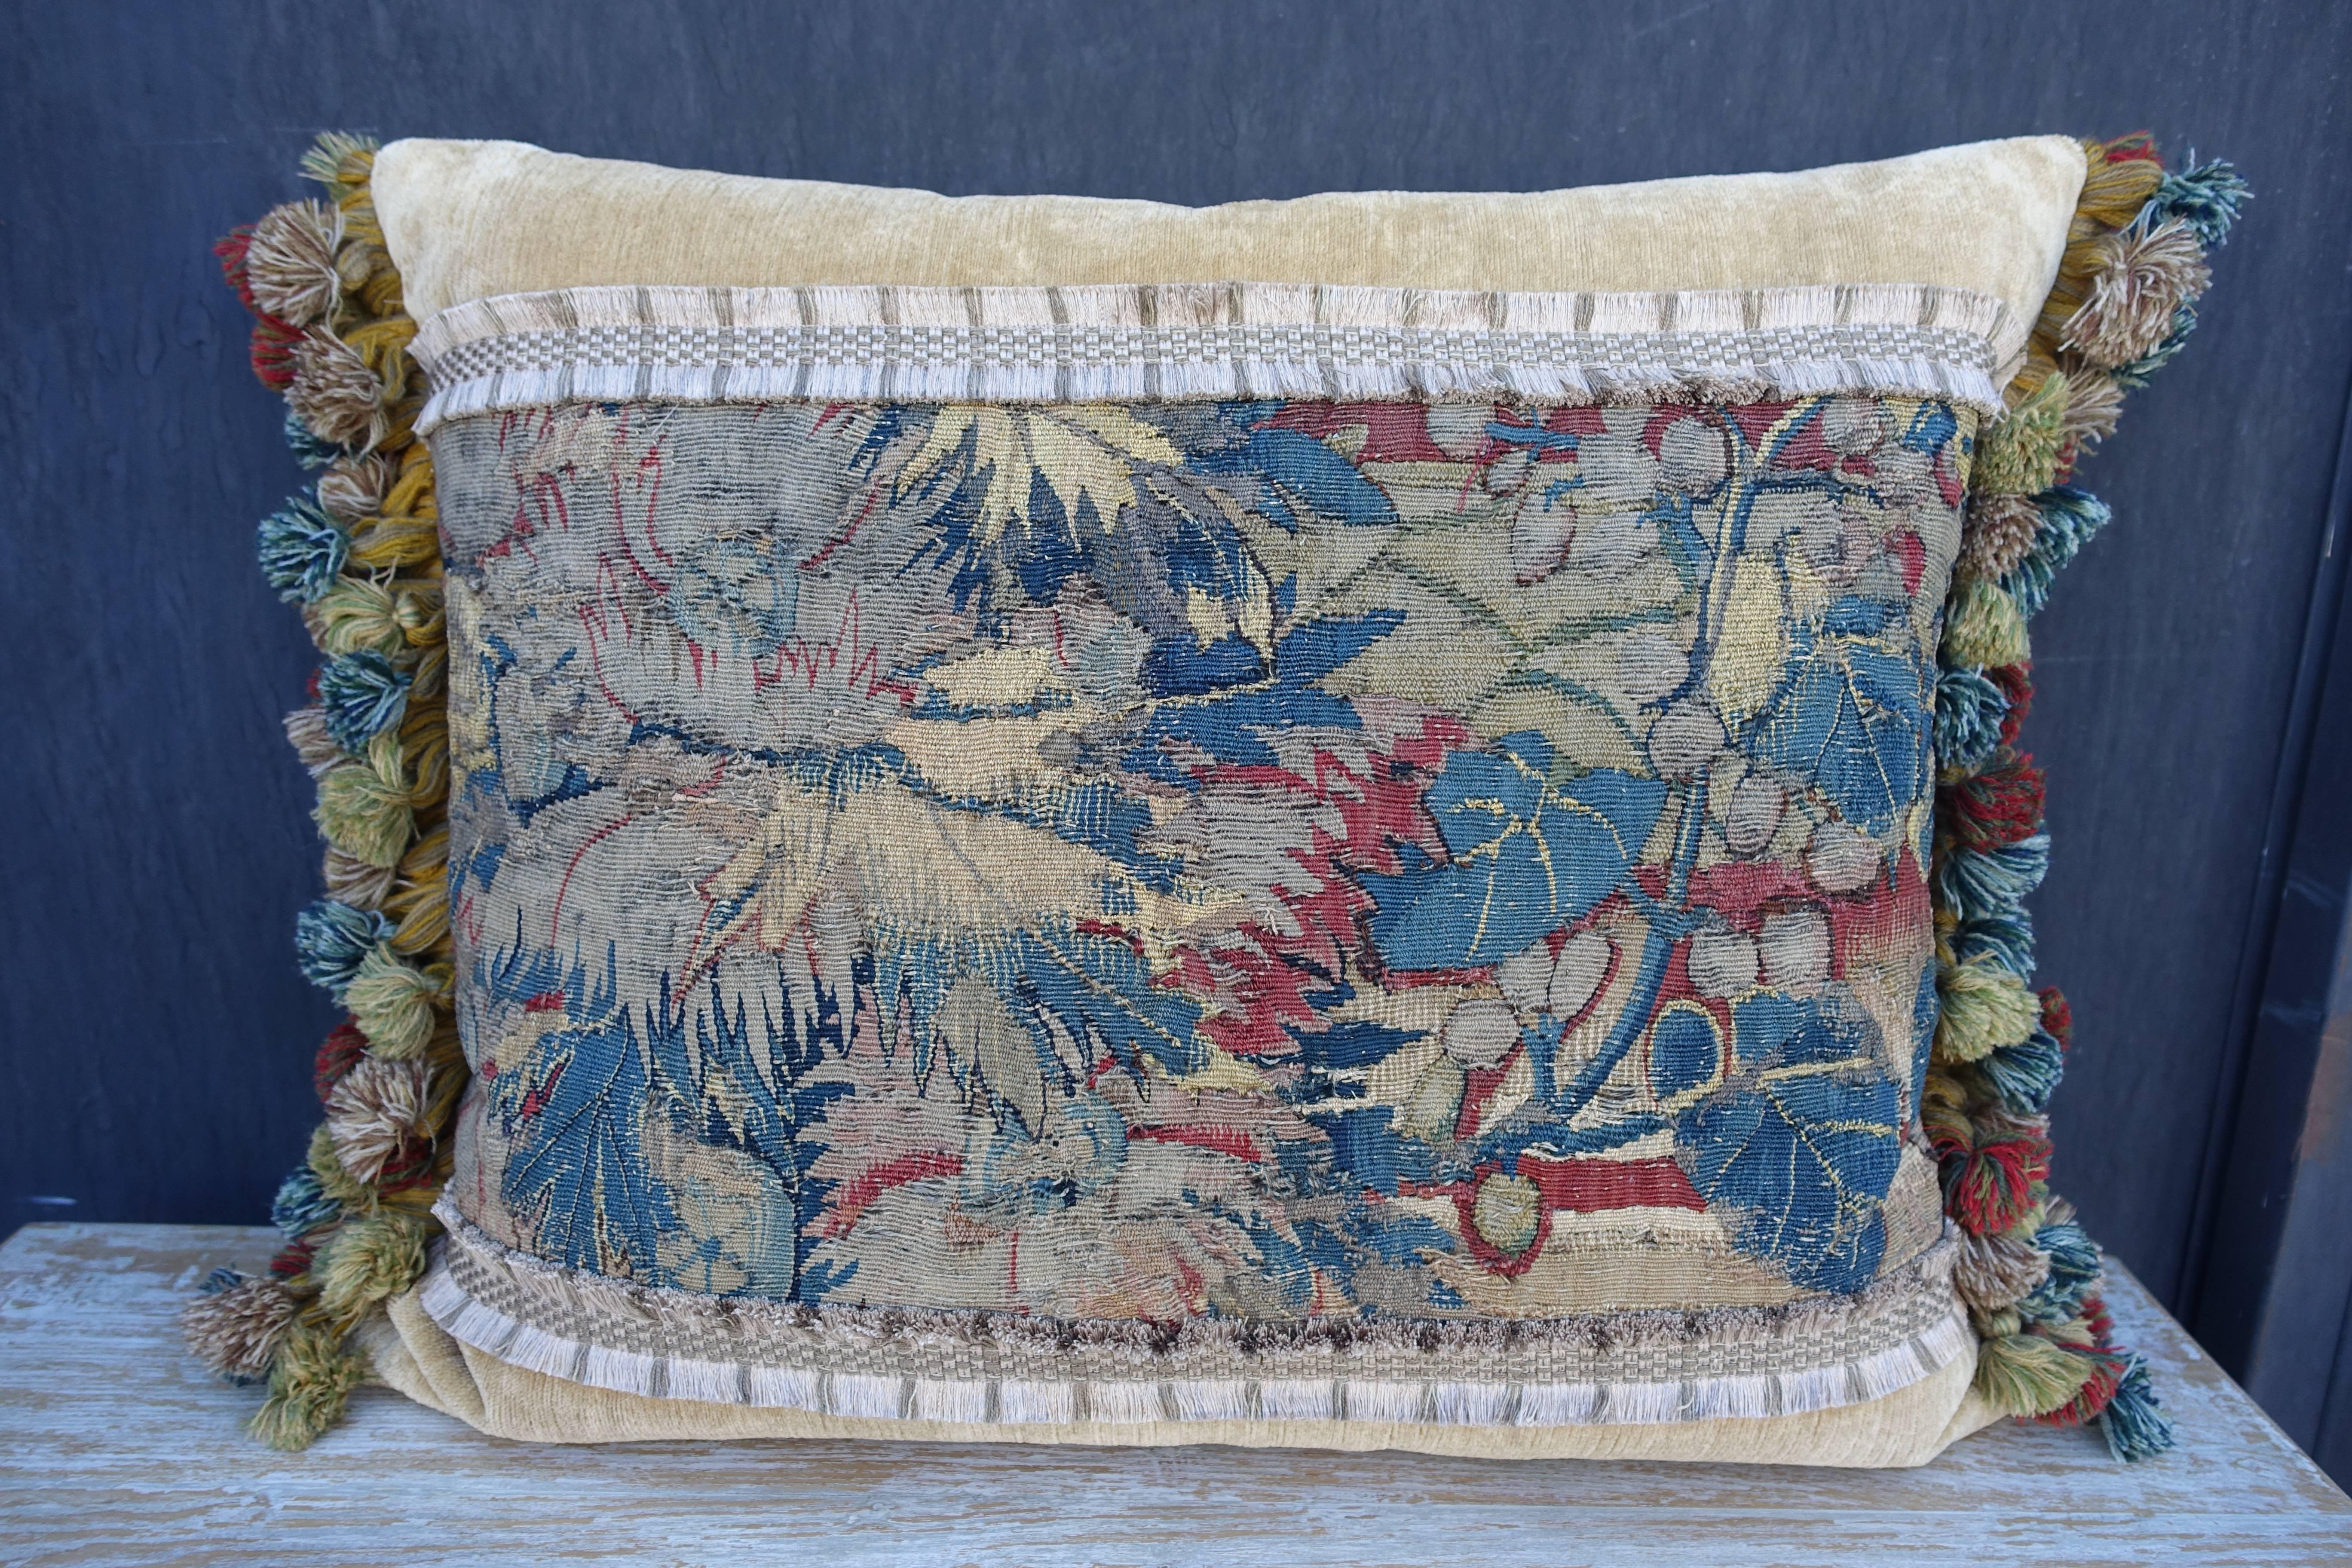 Pair of 18th century tapestry pillows adorned with fruit and flowers in rich shades of blues, greens, rust and gold on a velvet background. The pillows are finished with a multicolored coordinating tassel fringe. Down inserts, sewn shut.